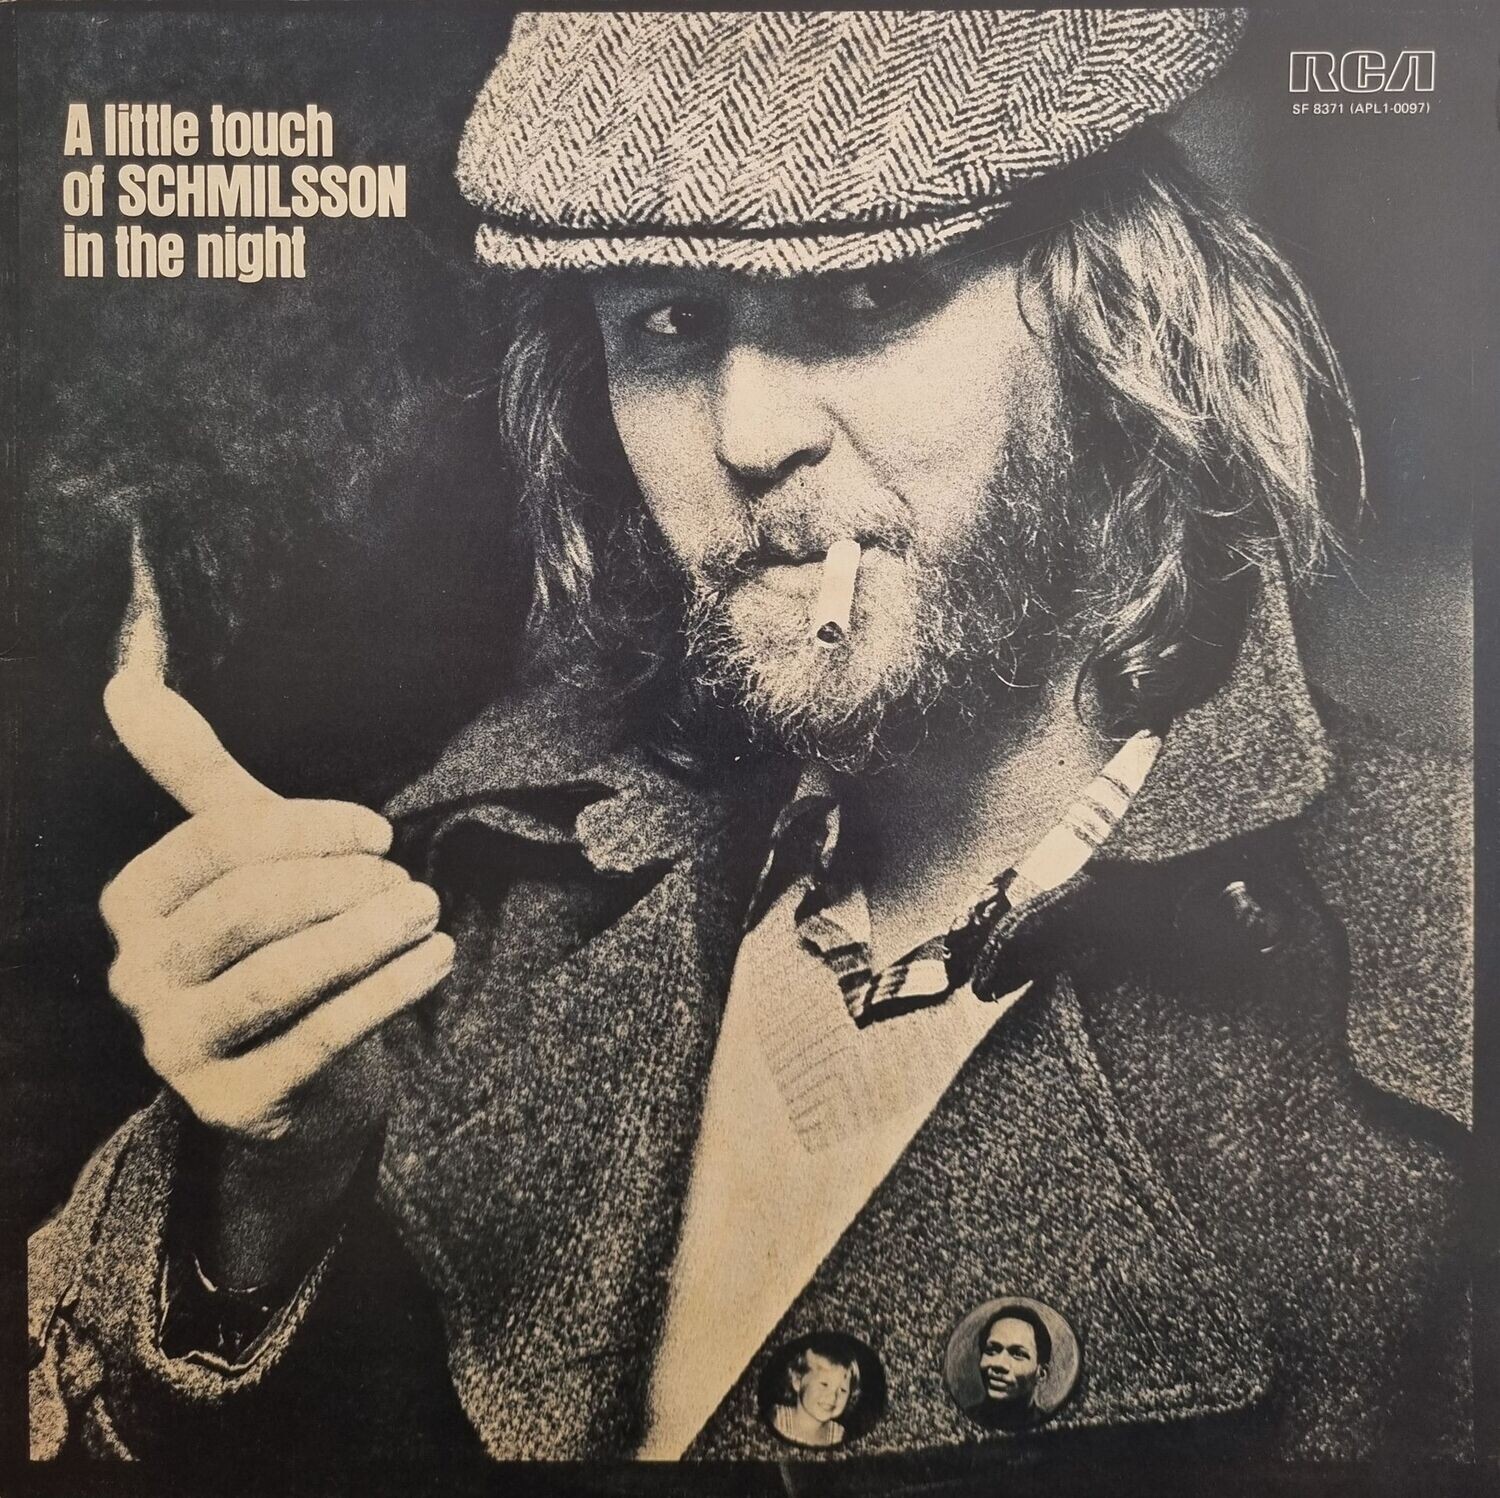 Harry Nilsson – A Little Touch Of Schmilsson In The Night (1973) Gatefold Sleeve